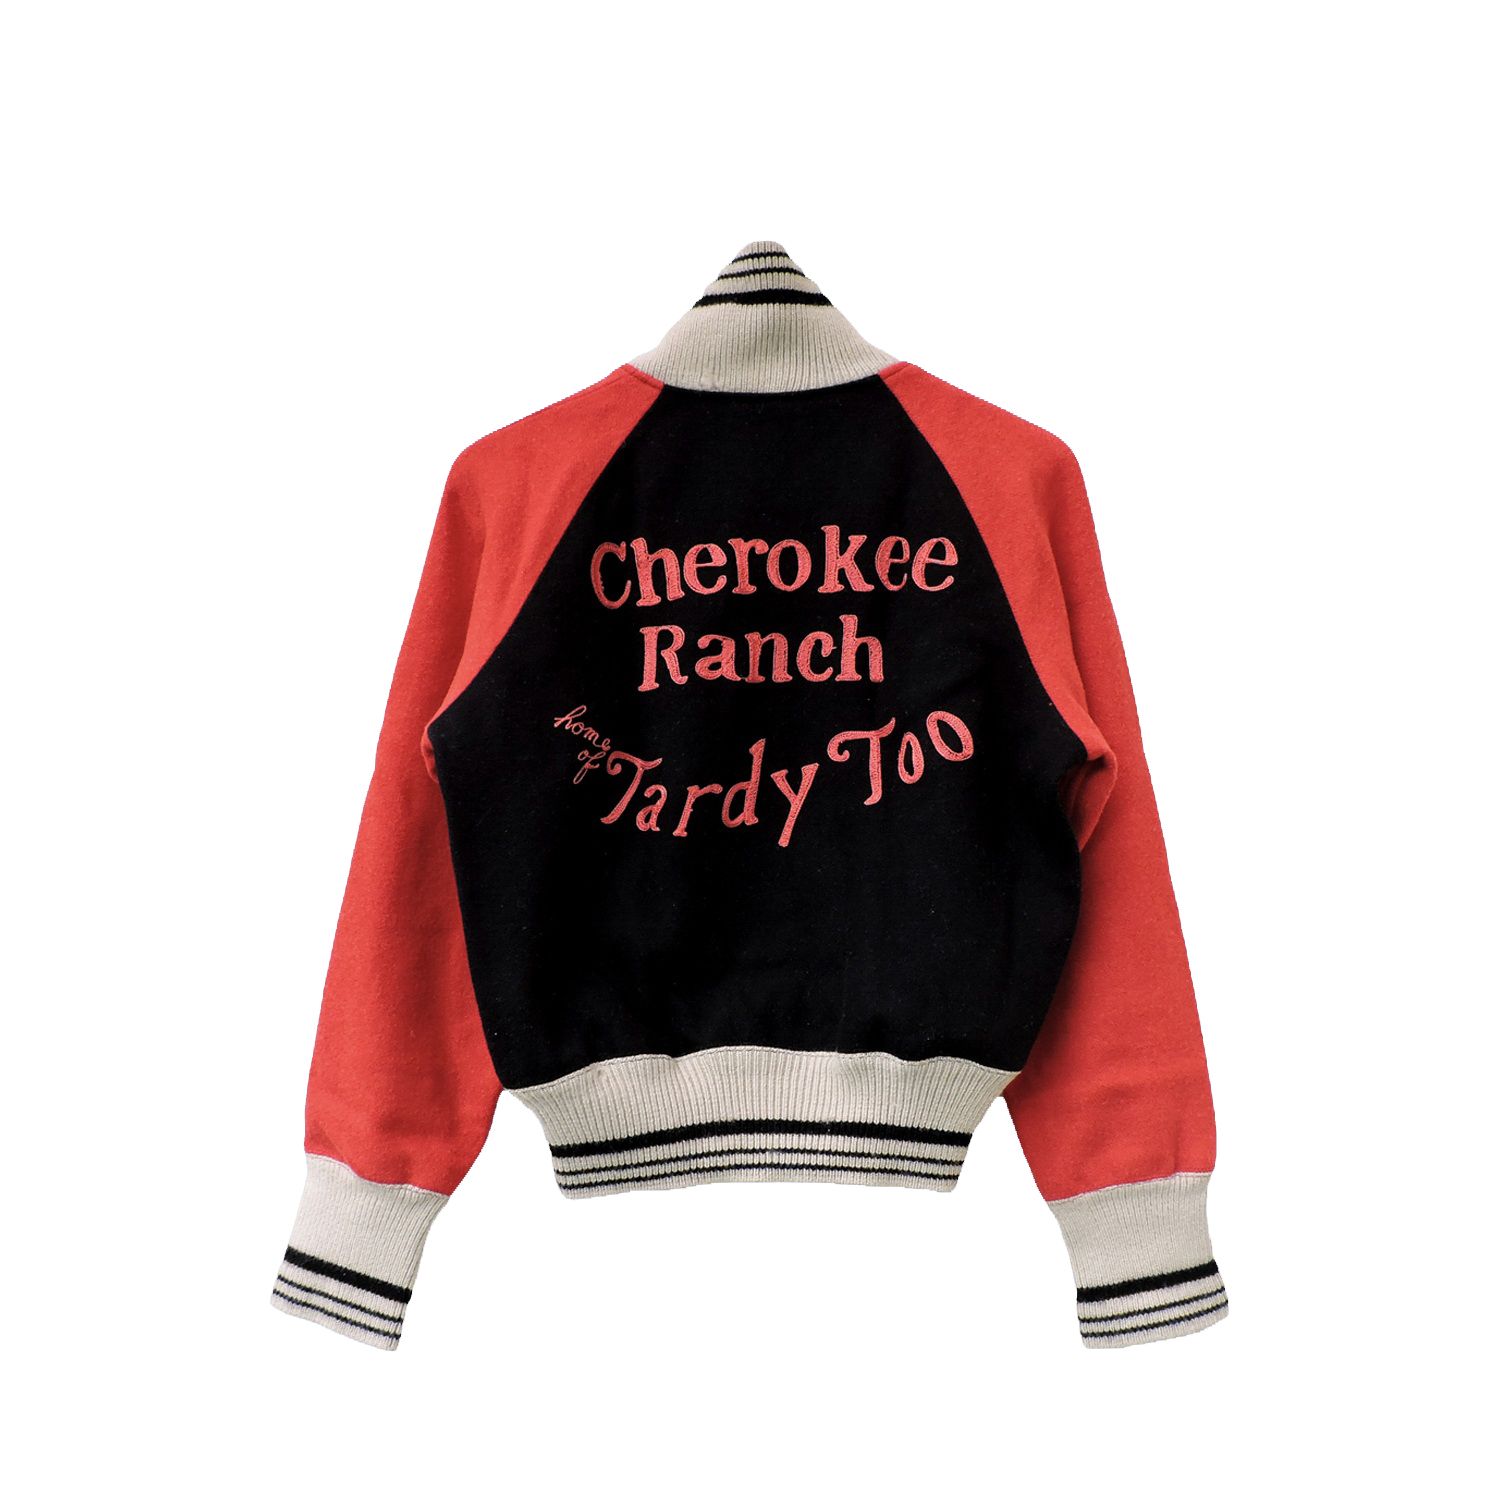 Vintage Wool Varsity Jacket by C.A.B Clothing Co., Inc. | Grailed